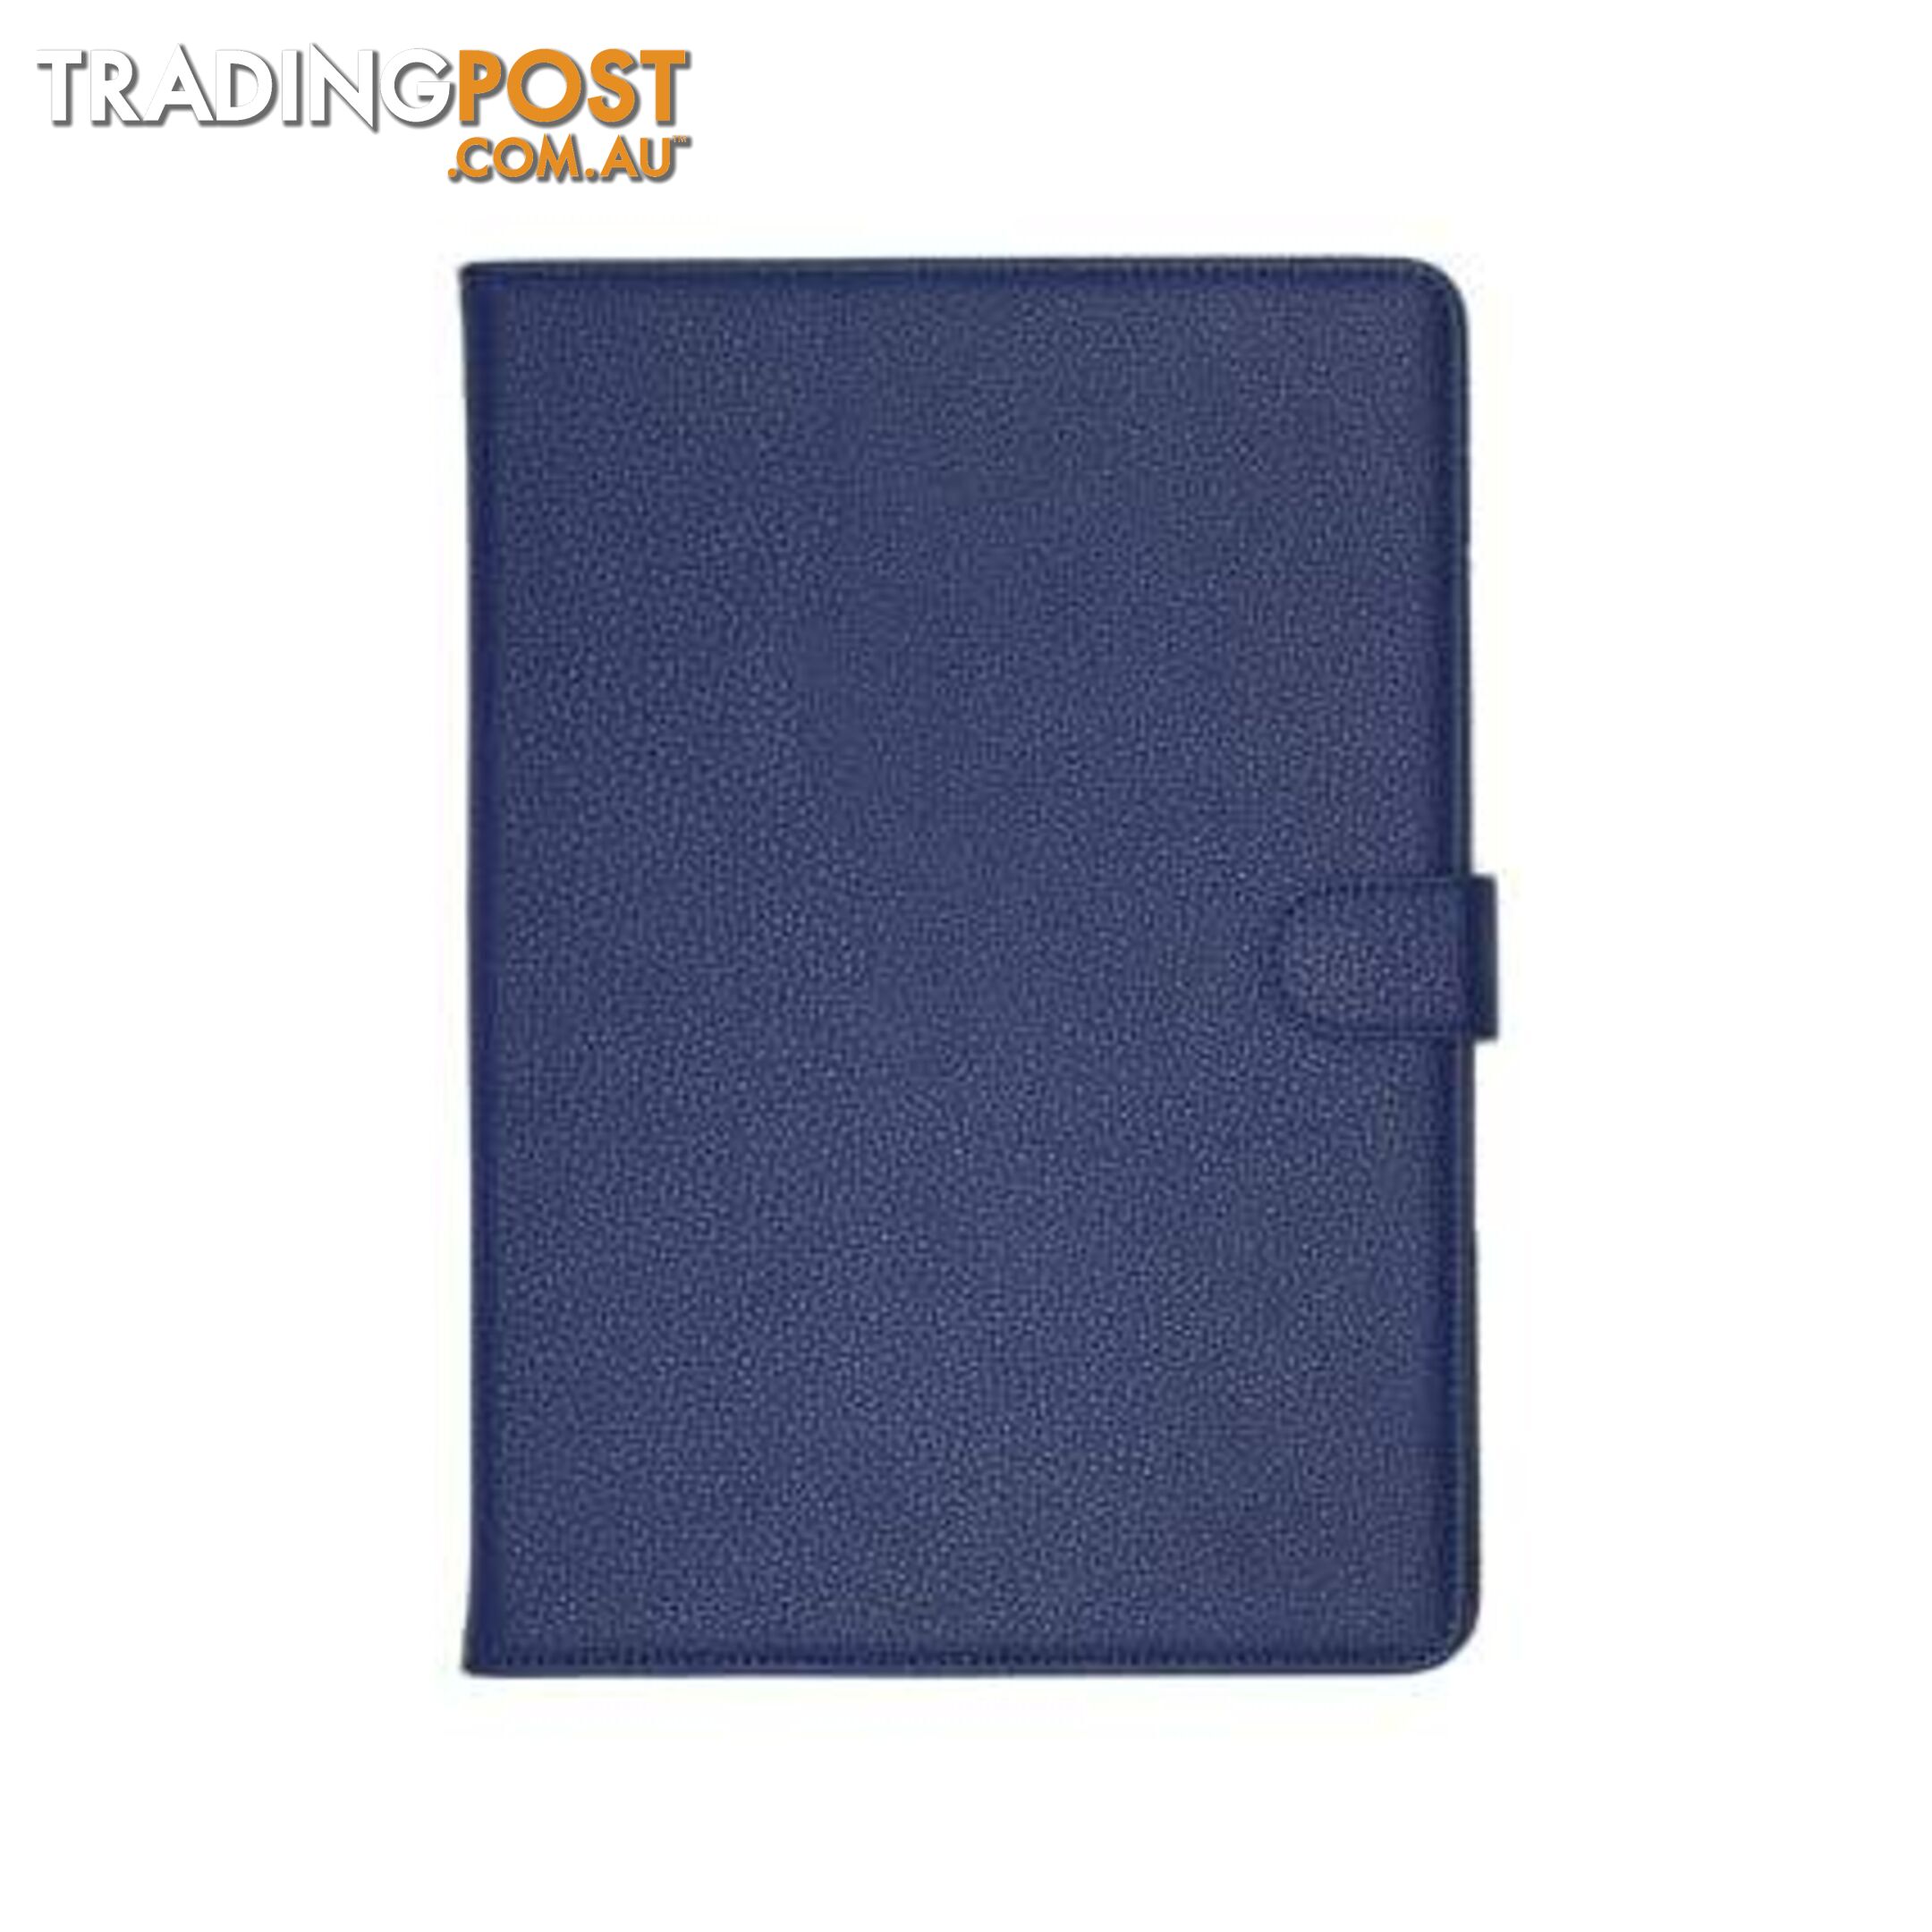 Cleanskin Book Cover For iPad Pro 11" (2018) - Cleanskin - Navy Blue - 9319655068442